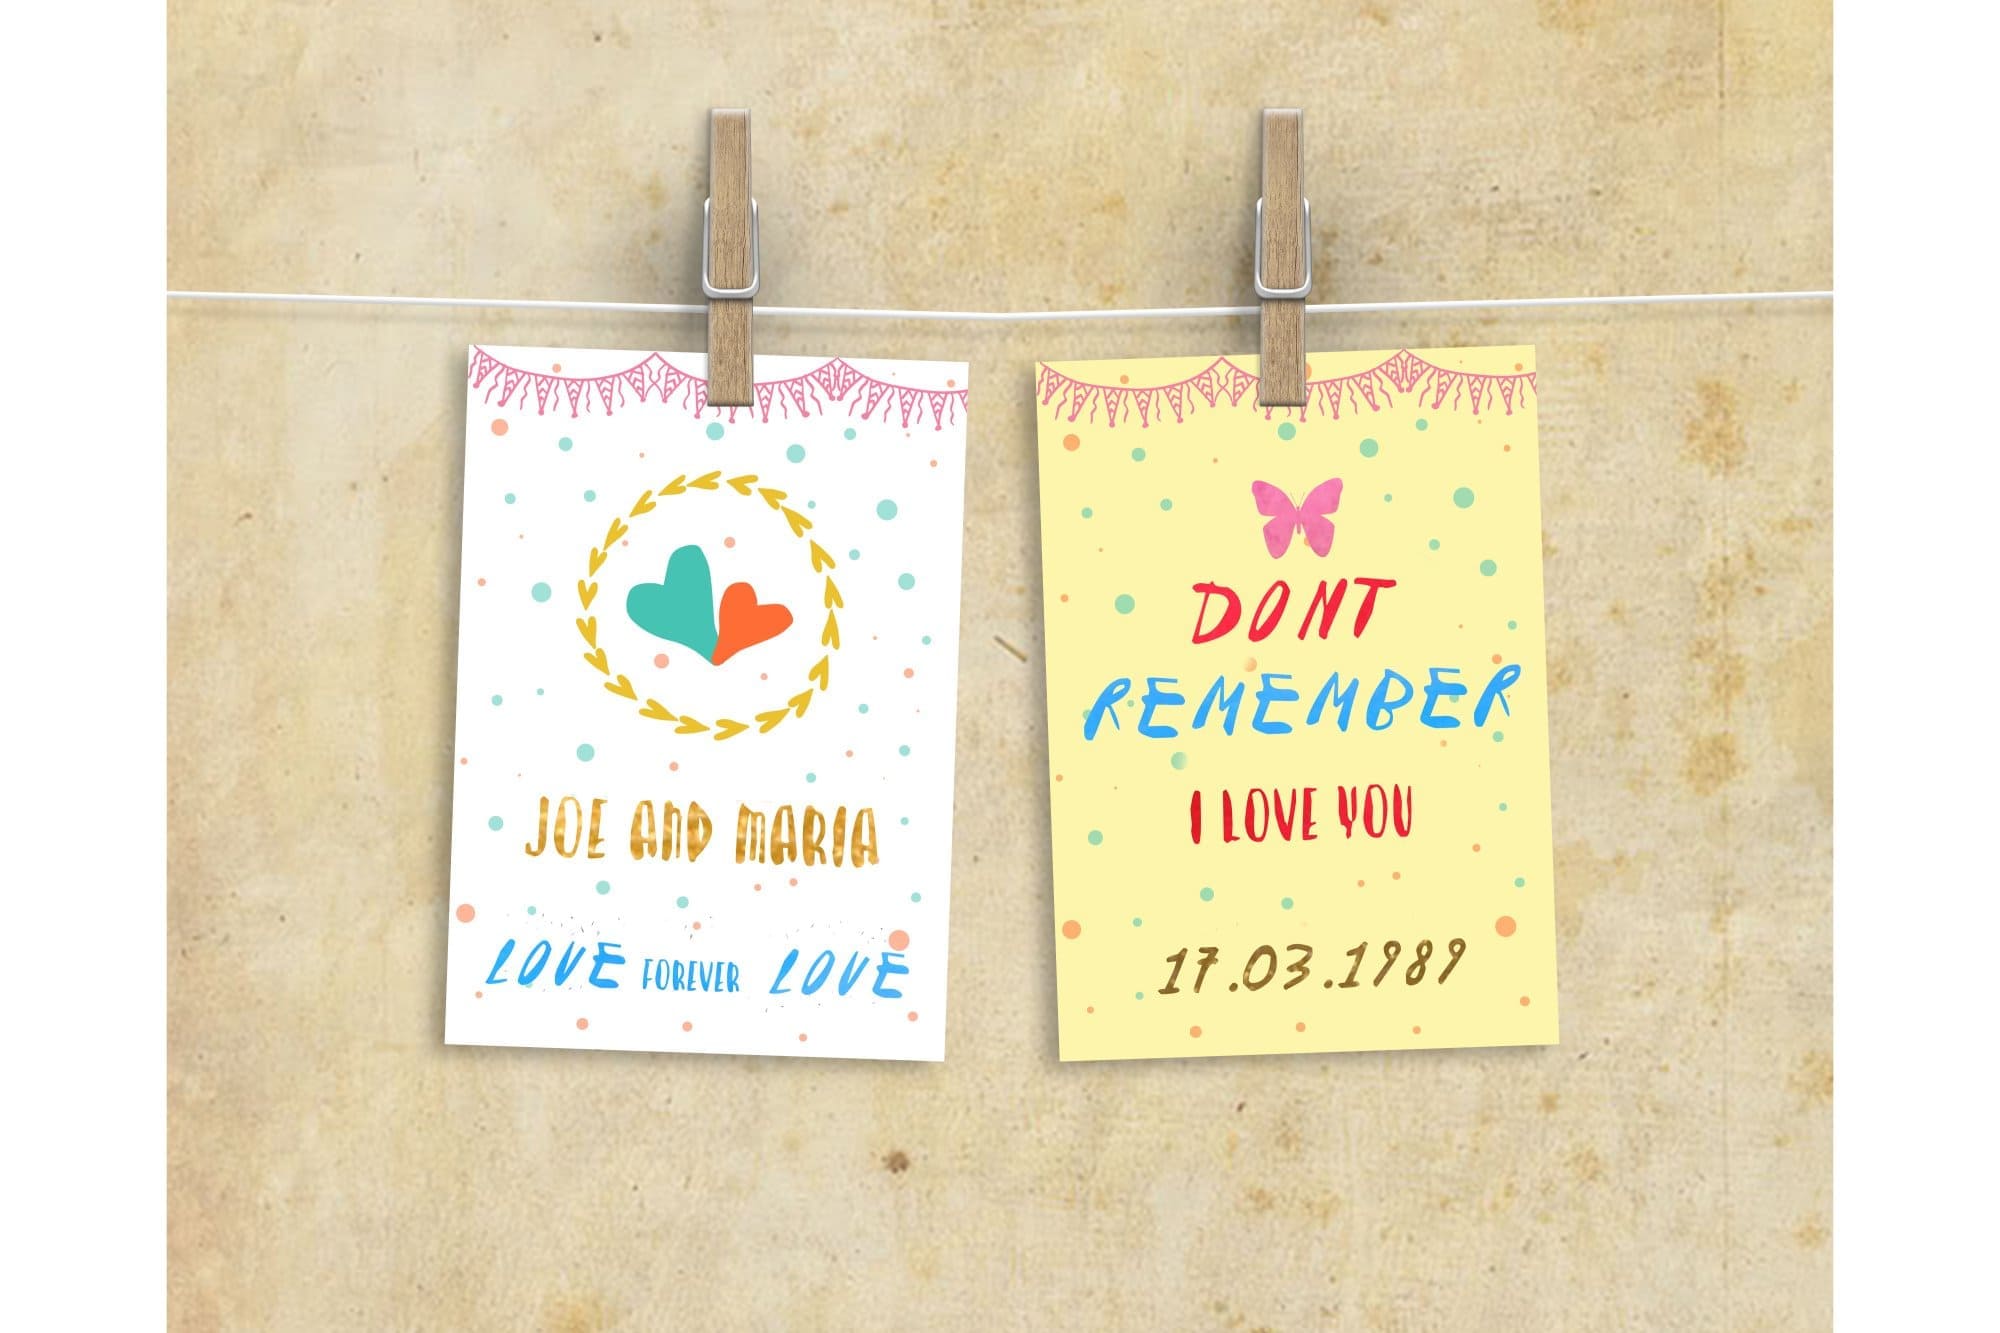 Two cards with inscriptions "Joe and Maria" and "Don't remember I love you".